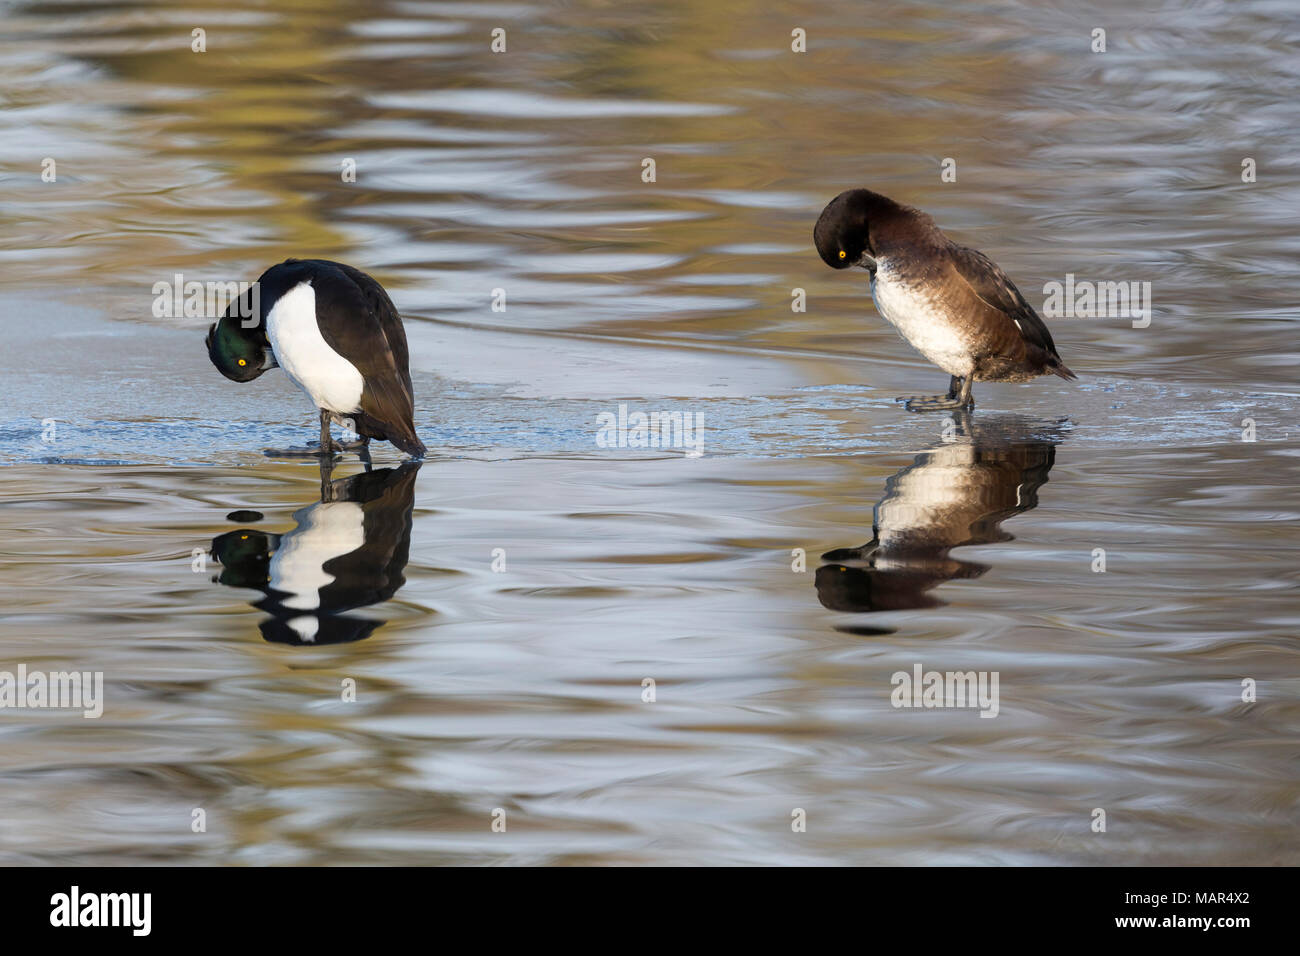 Pair of Tufted Duck Aythya fuligula standing on ice showing reflection in water Stock Photo